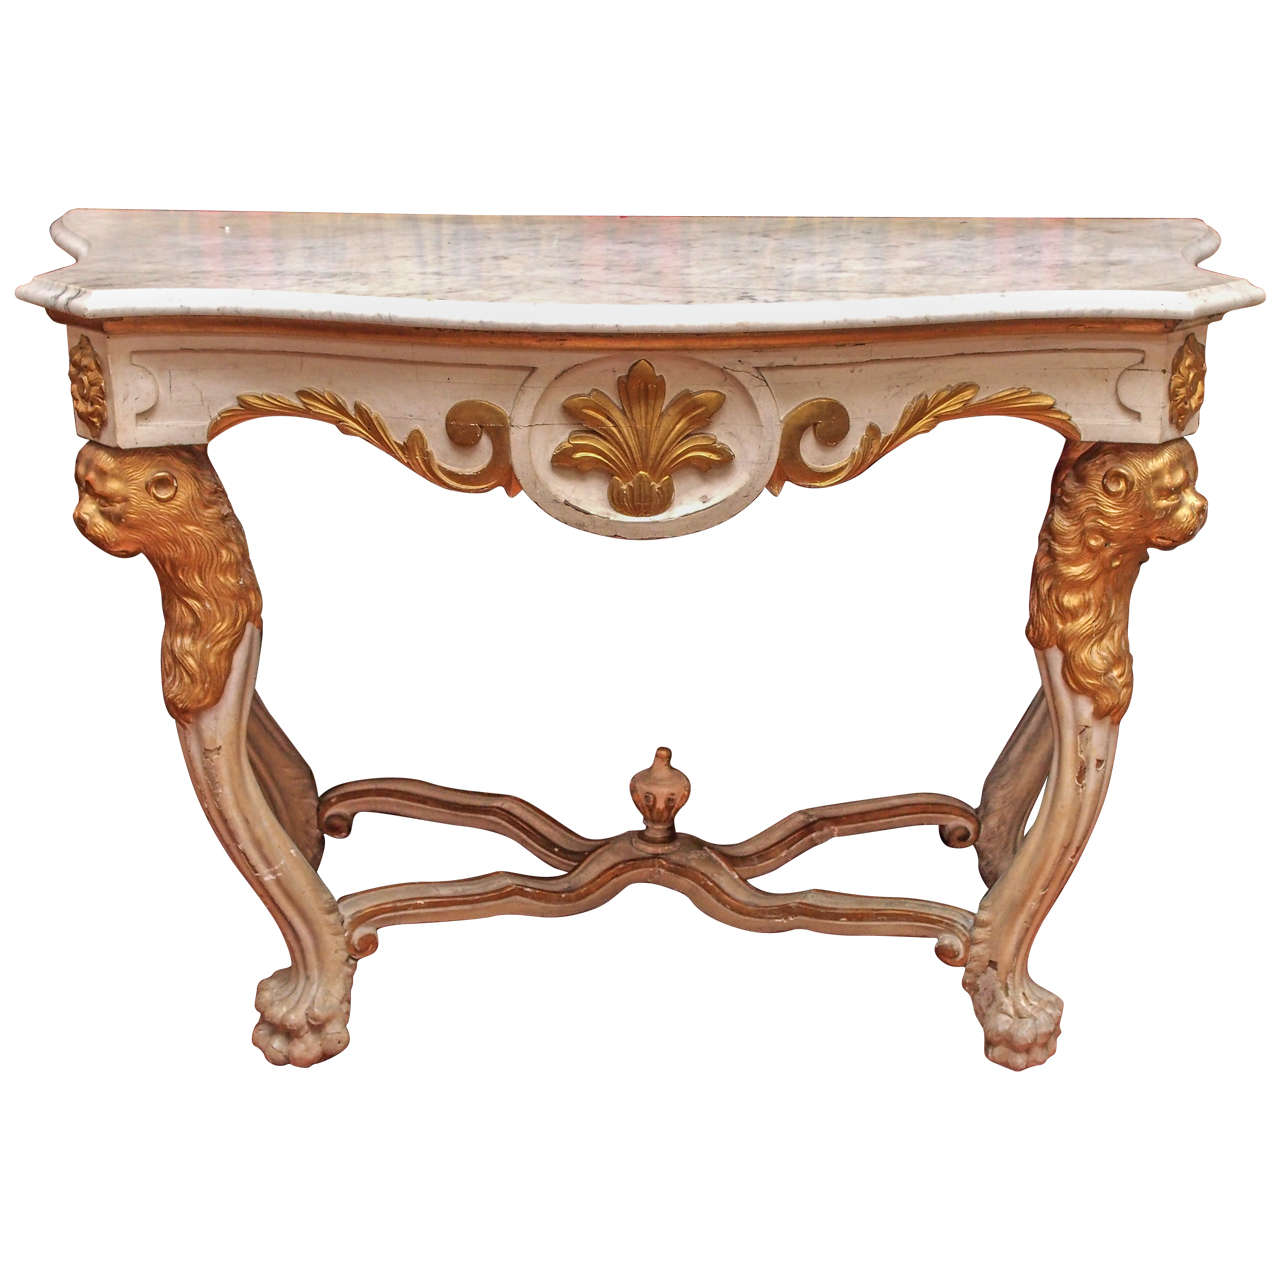 19th Century Continental Painted and Parcel Gilt Console Table